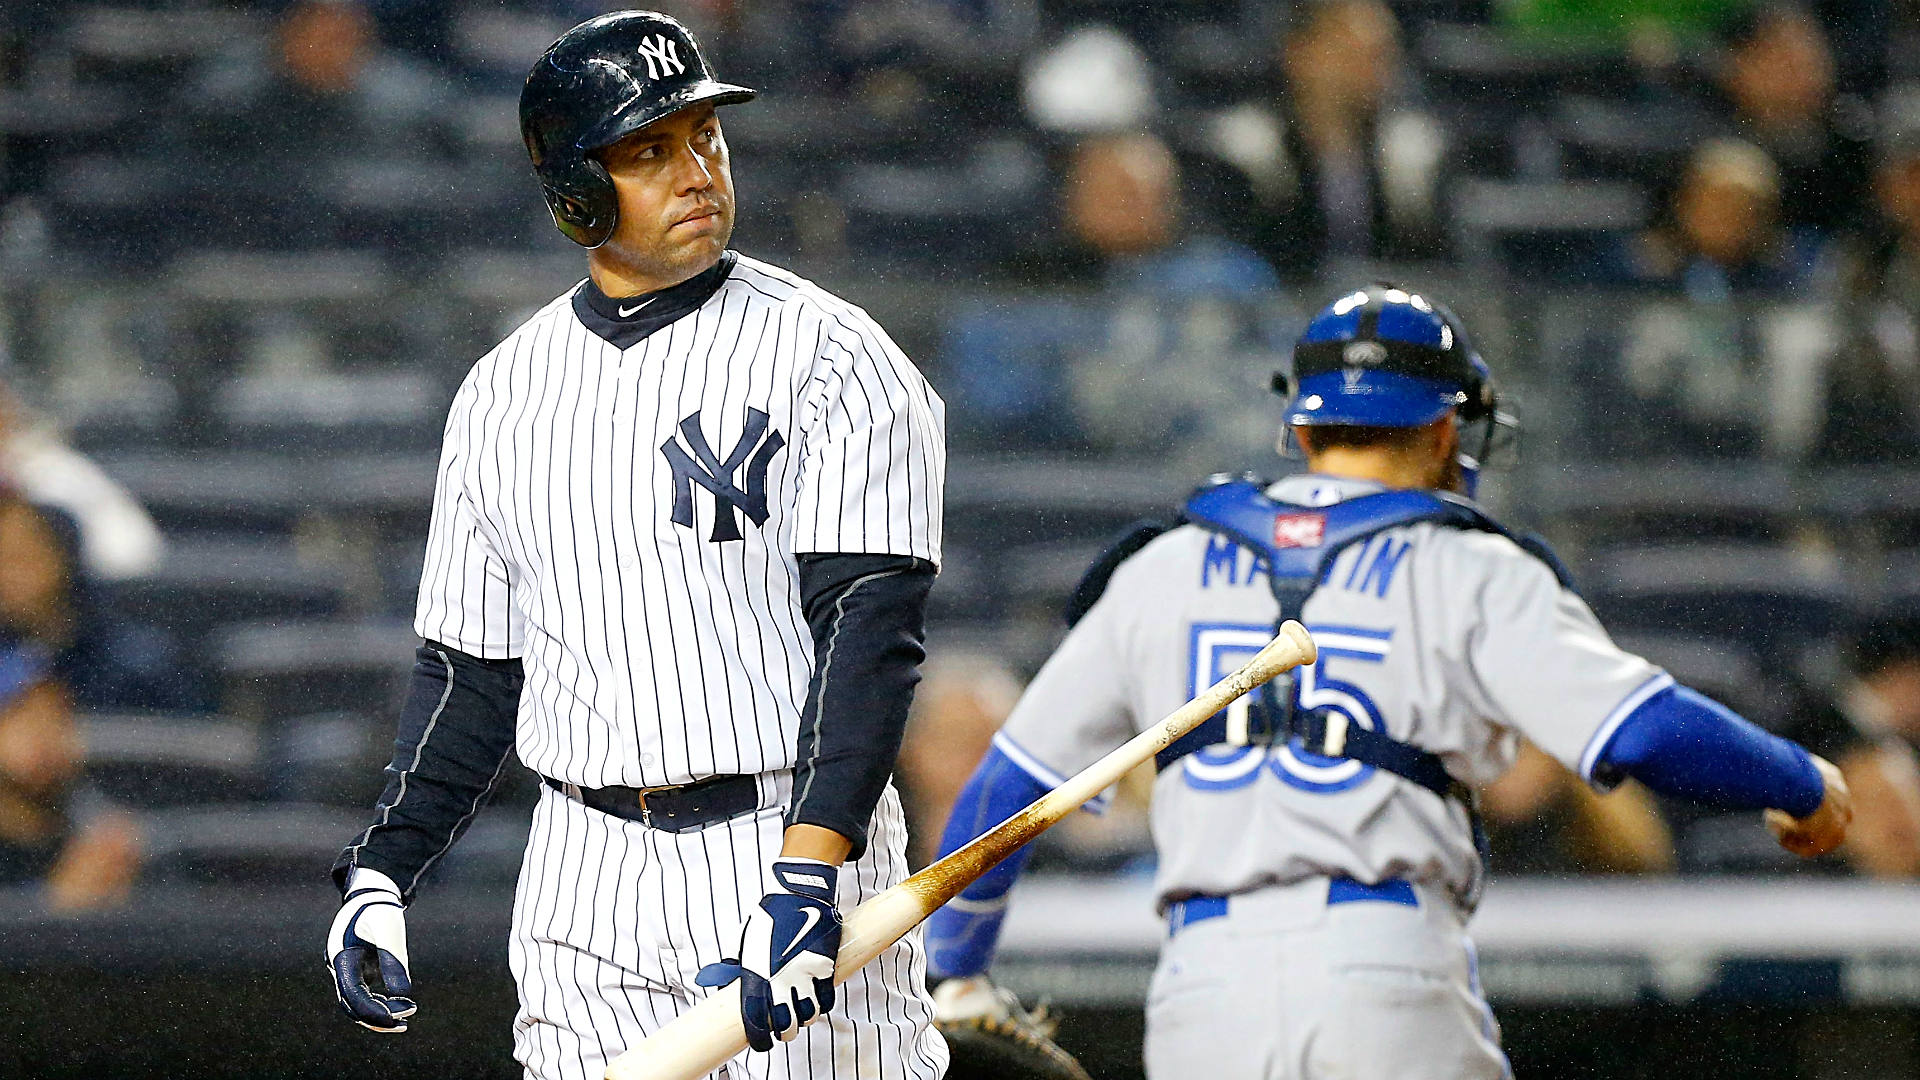 For Yankees Could Be Year The Wheels Finally Fall Off